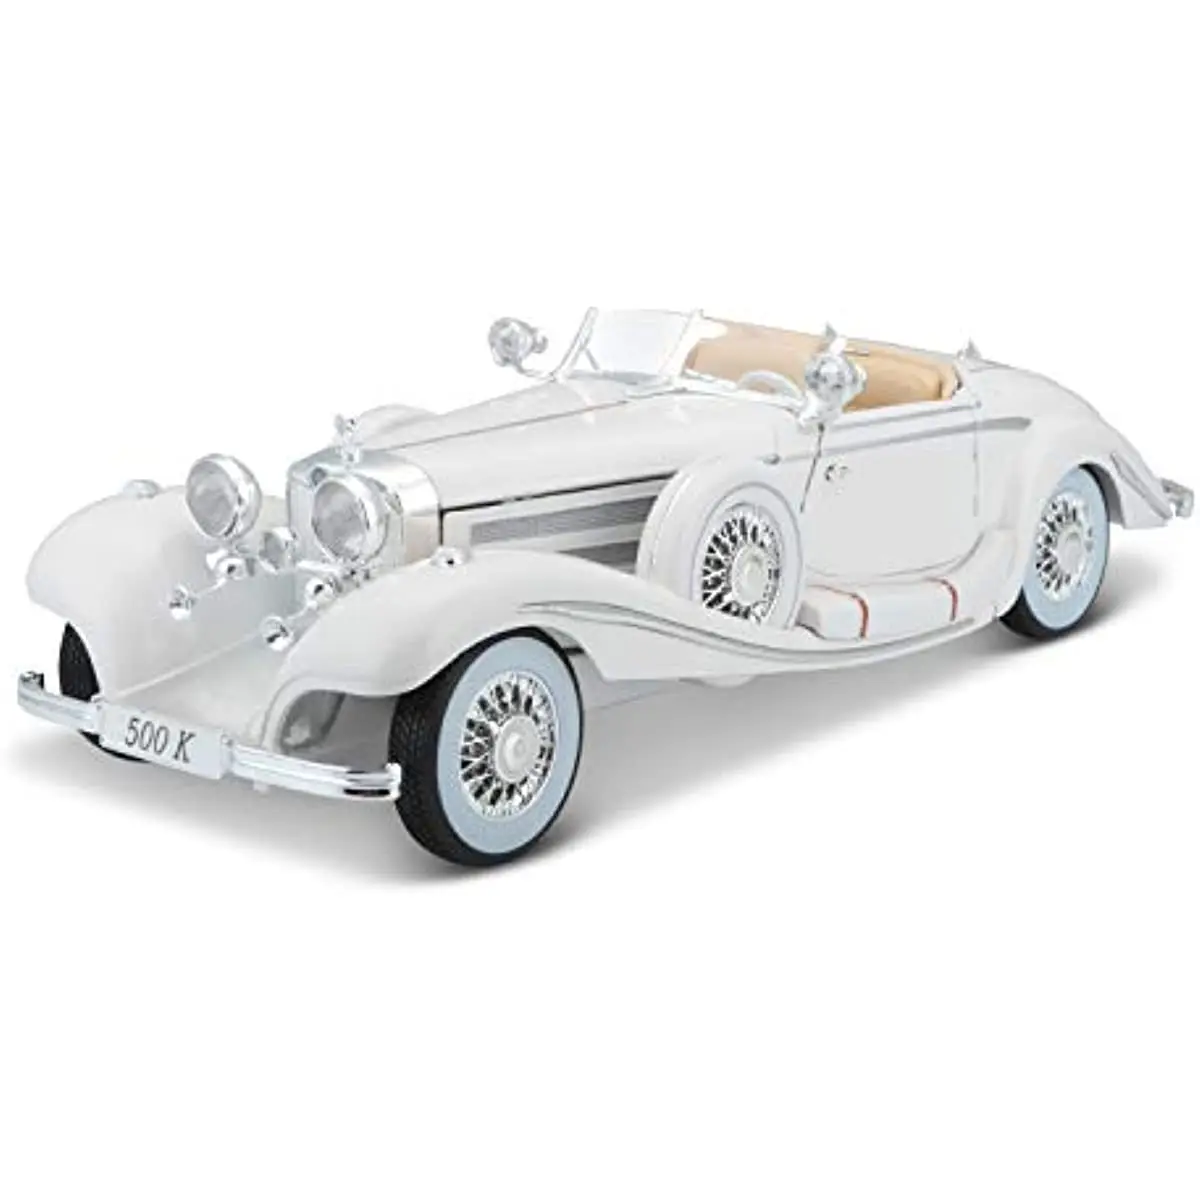 

Maisto 1:18 1936 Mercedes-Benz 500K Brand Alloy Car Model Static Die Casting Model Collection Gift Toy Gift Giving